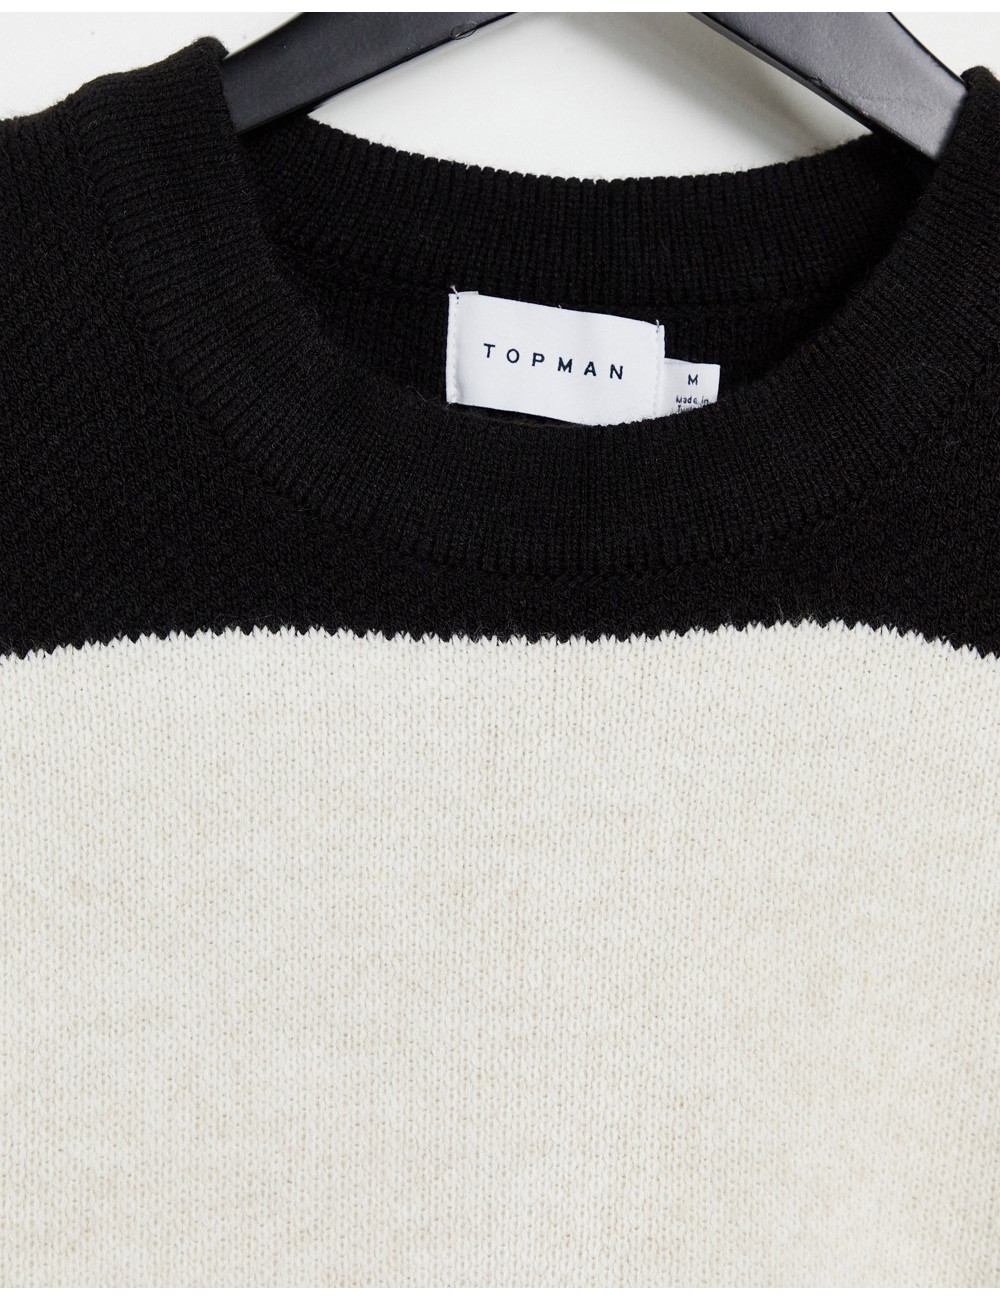 Topman striped knitted...